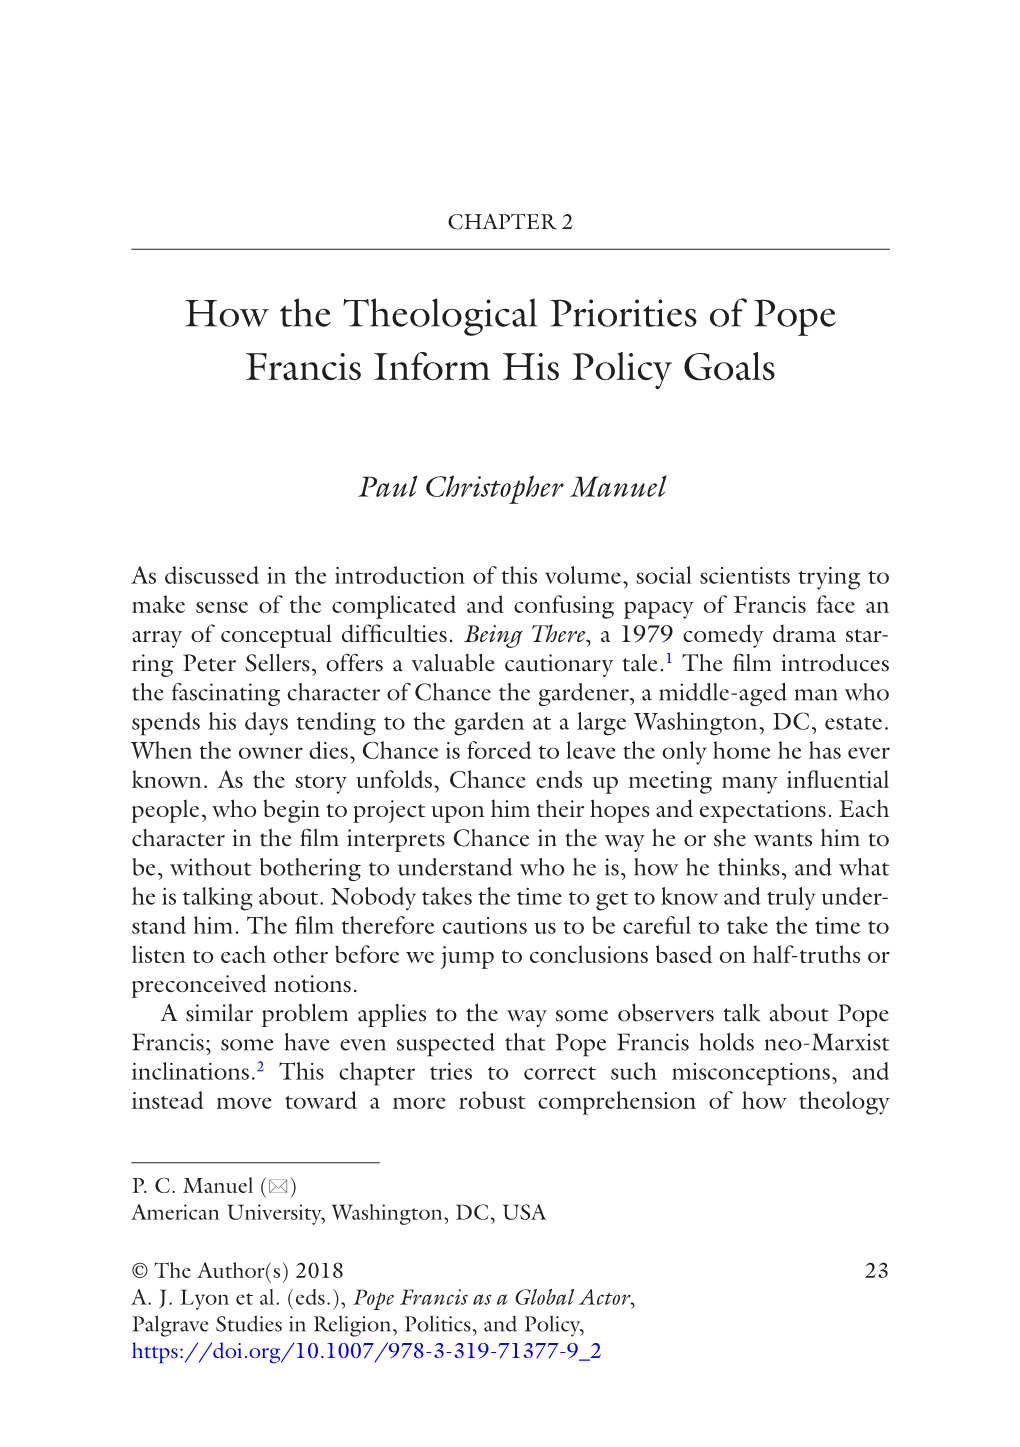 How the Theological Priorities of Pope Francis Inform His Policy Goals